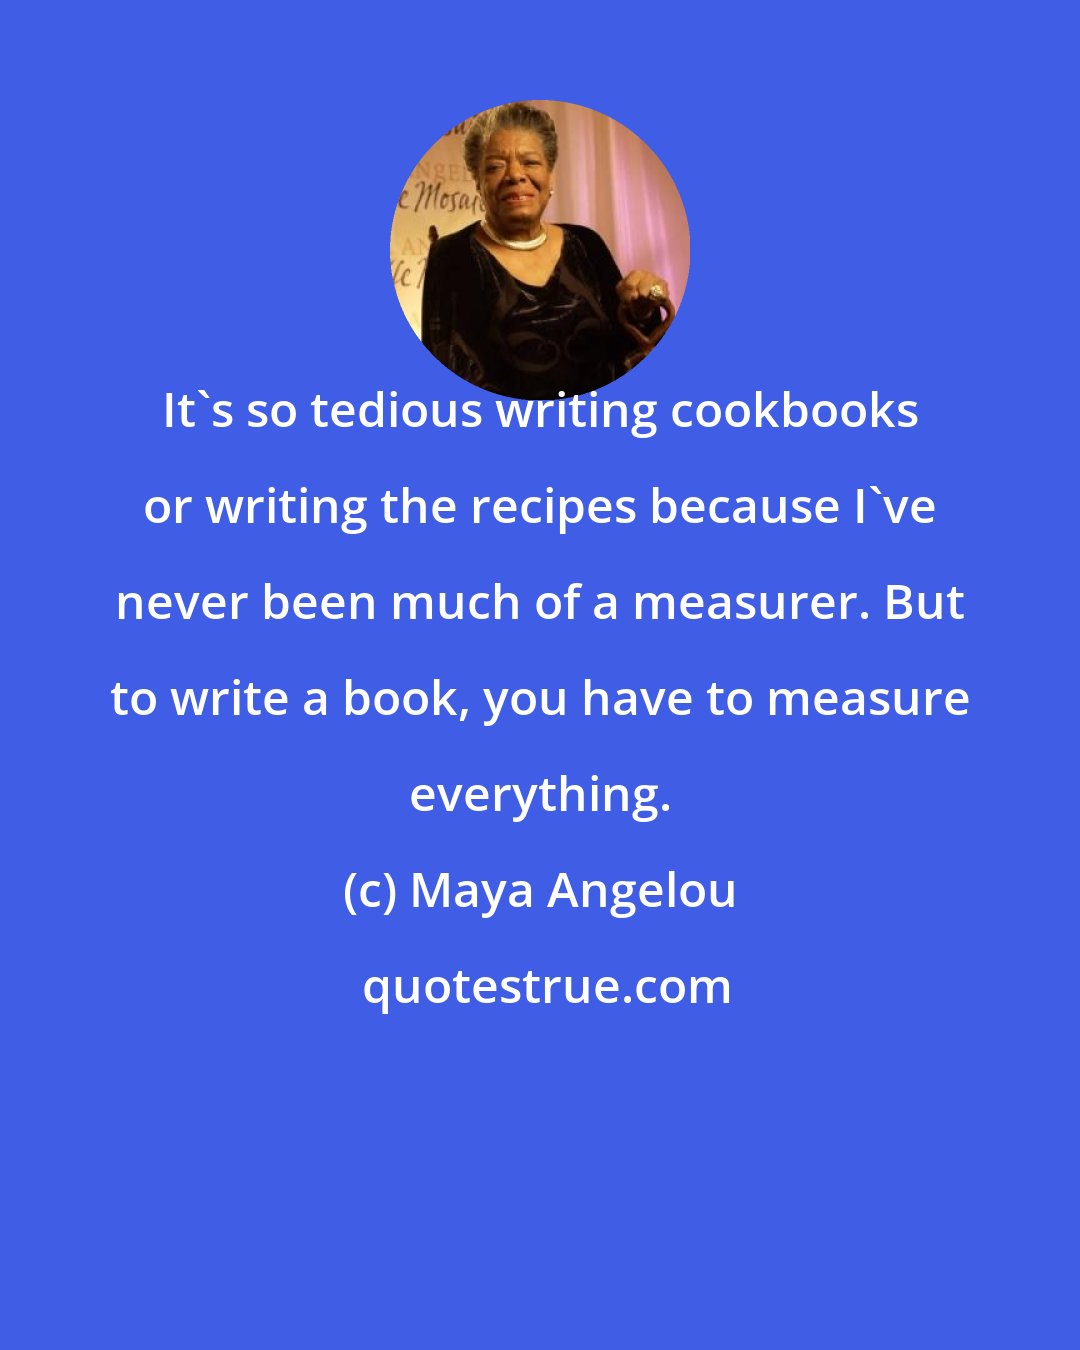 Maya Angelou: It's so tedious writing cookbooks or writing the recipes because I've never been much of a measurer. But to write a book, you have to measure everything.